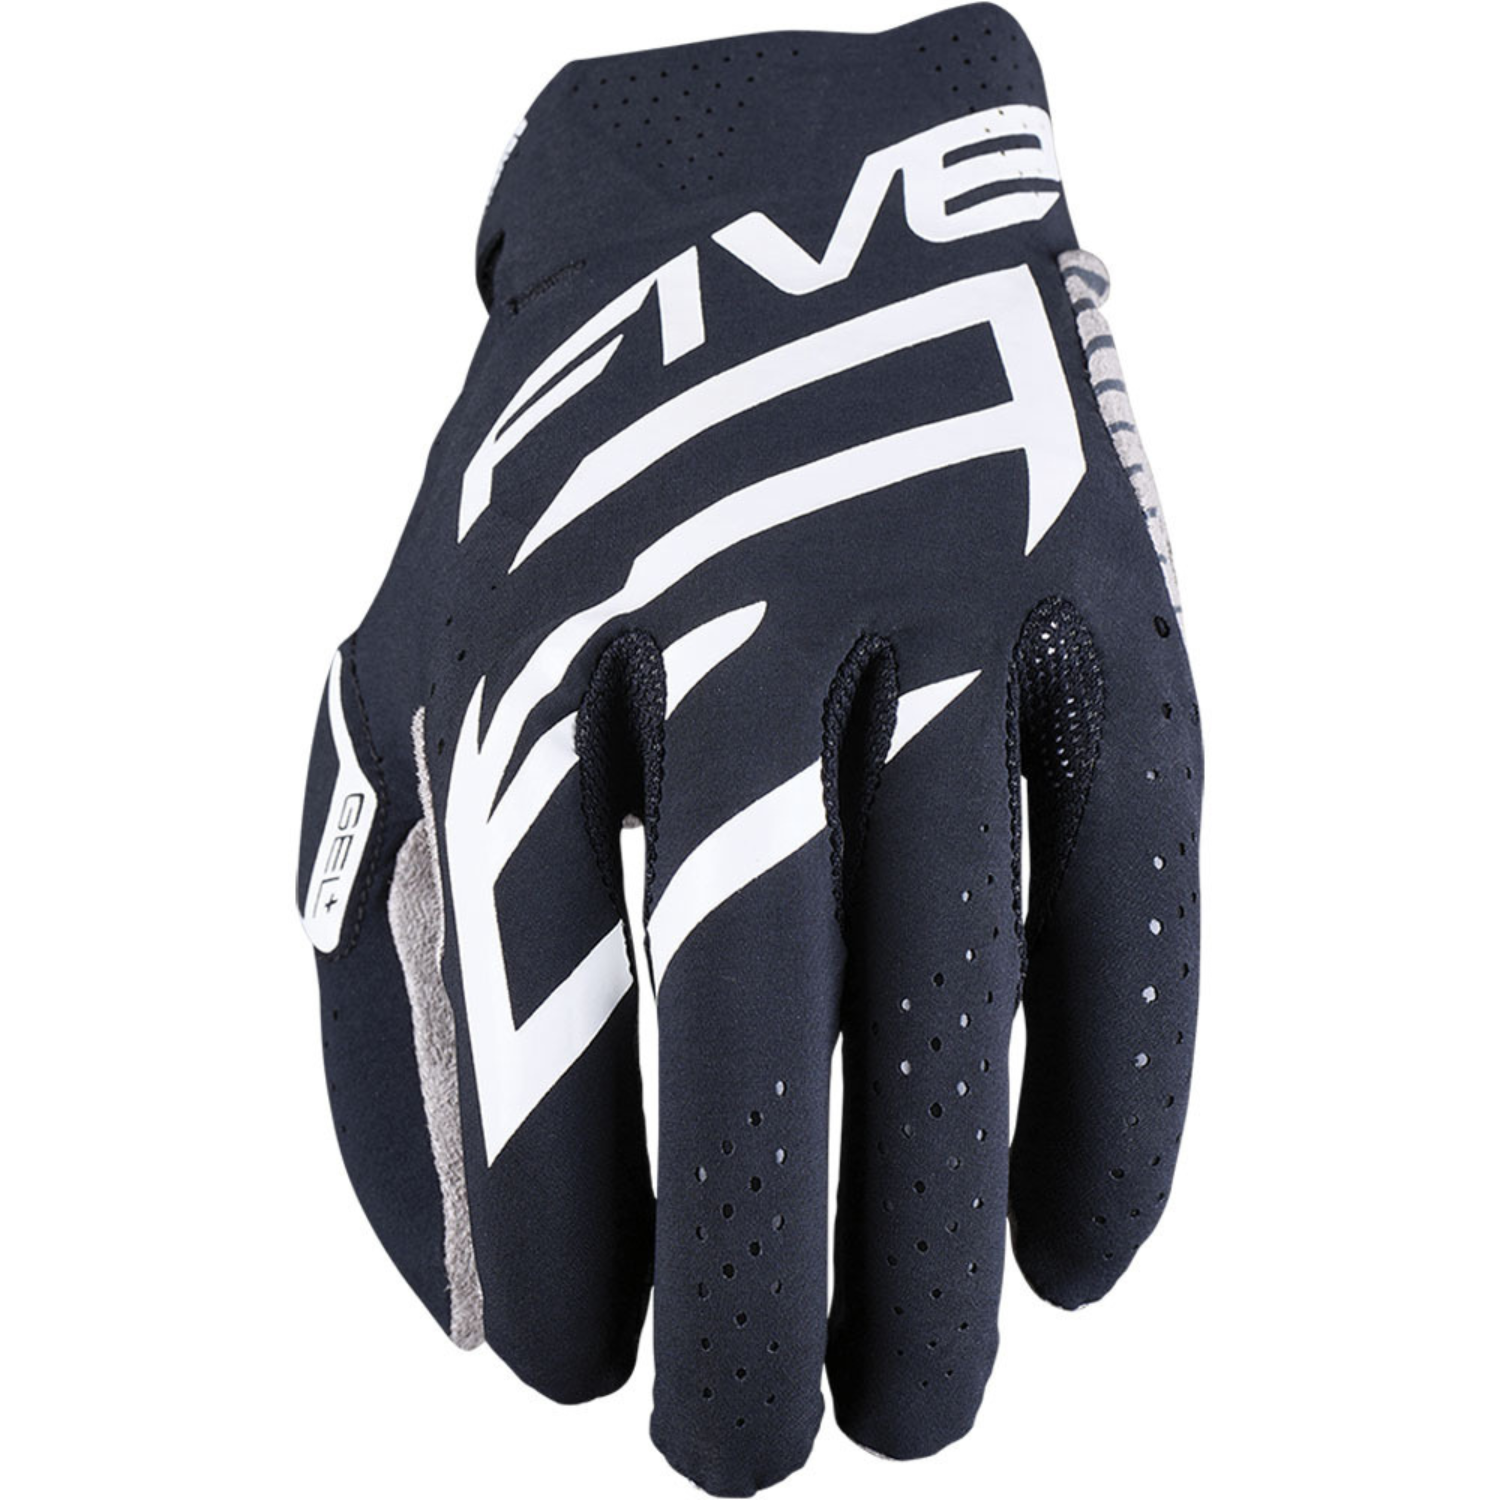 Image of Five MXF Race Gloves Black White Size M ID 3841300111587